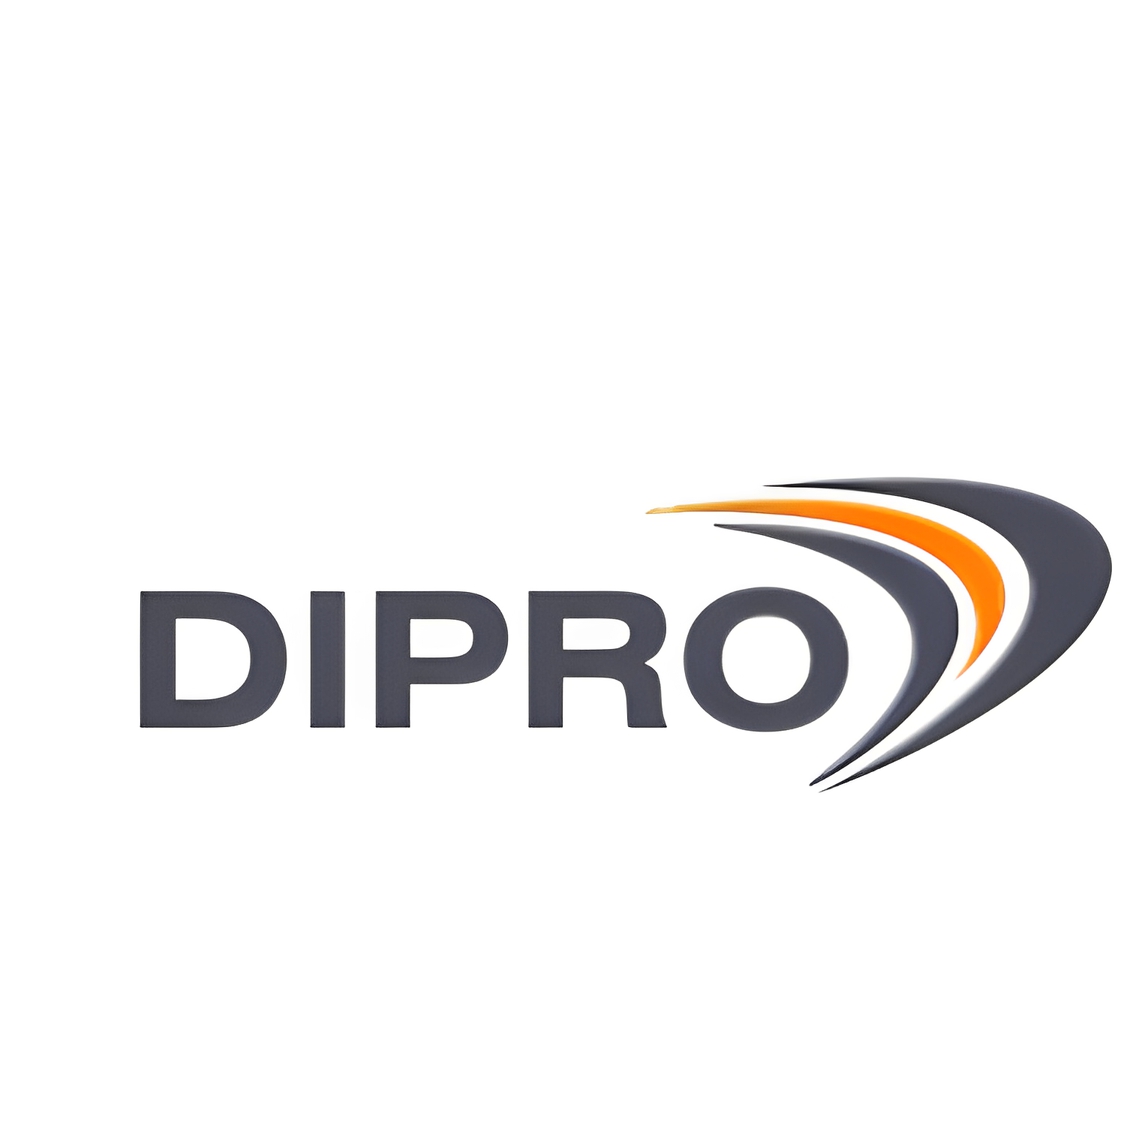 DIPRO OÜ - Constructional engineering-technical designing and consulting in Rae vald